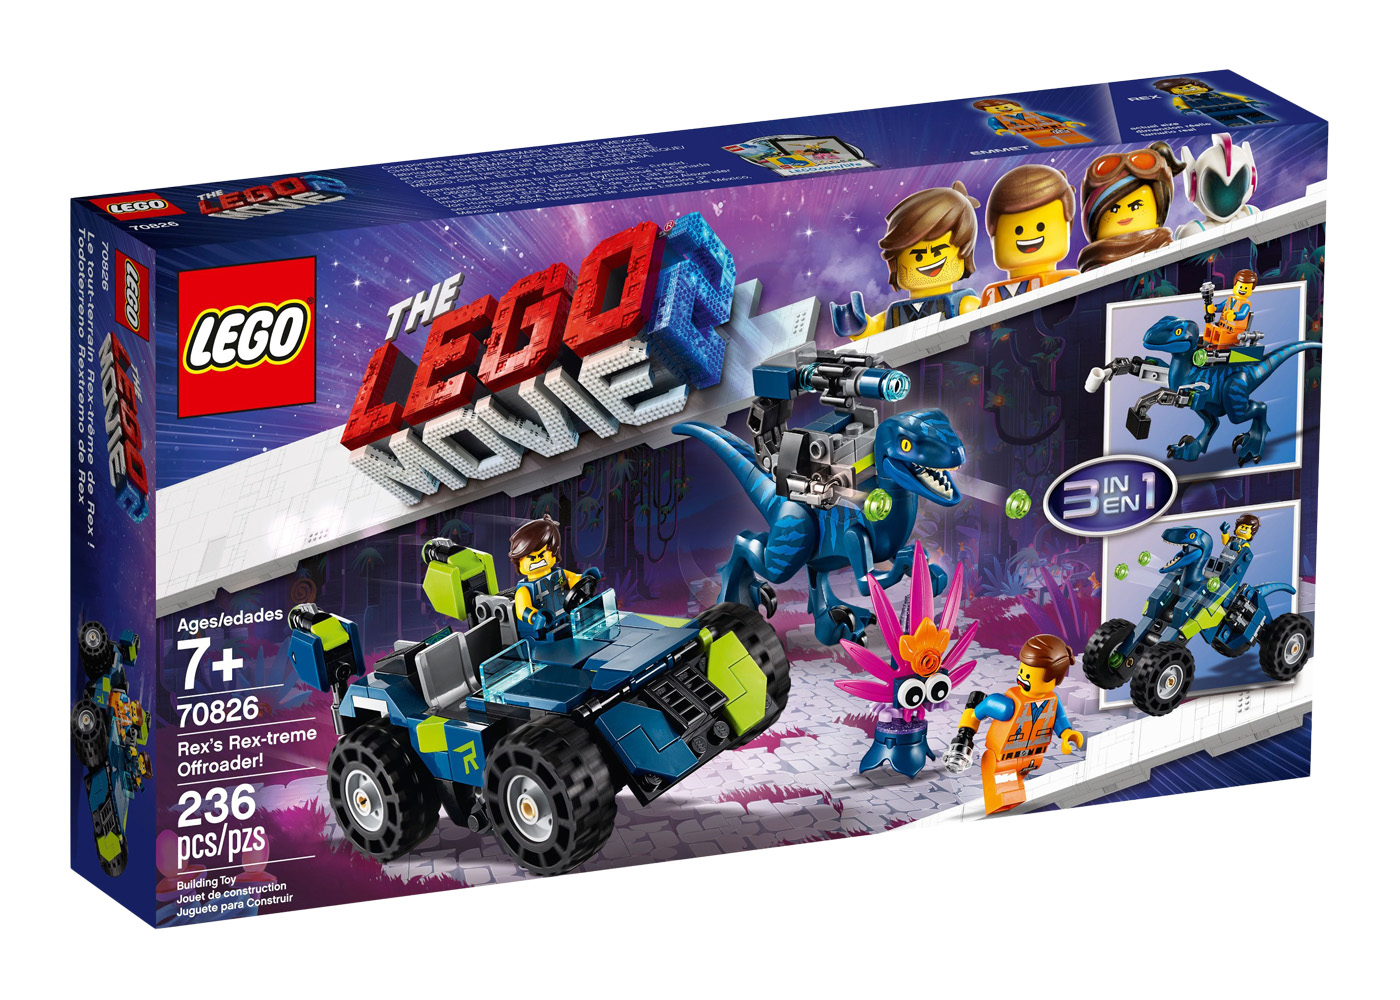 LEGO The LEGO Movie 2 Emmet and Lucy's Escape Buggy! Set 70829 - US